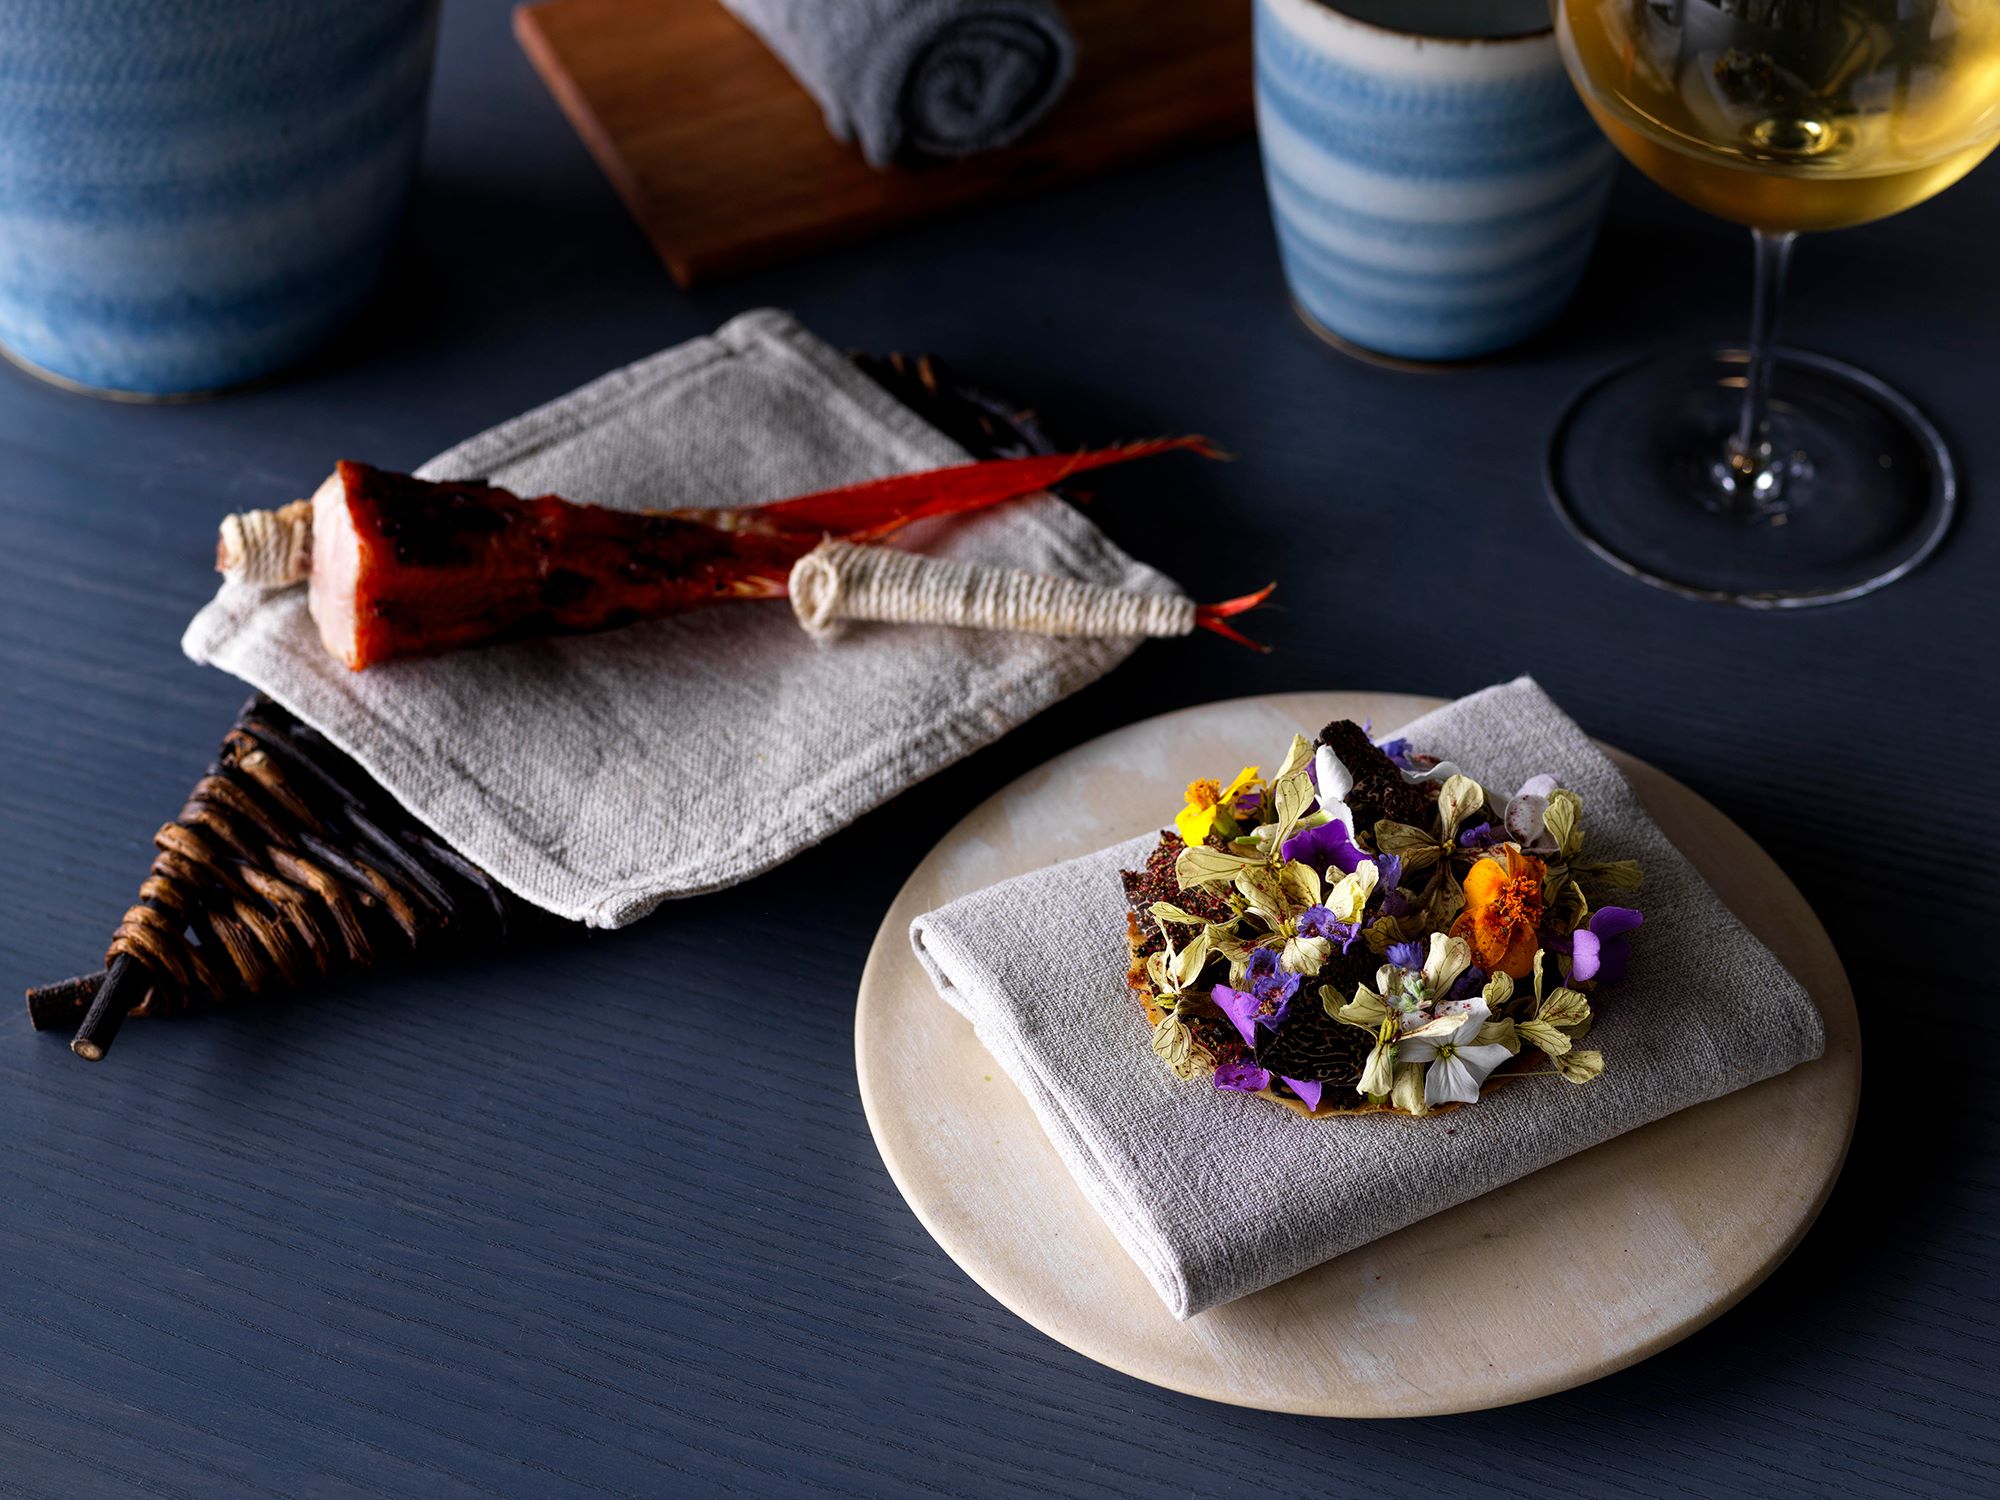  The charcoal-grilled red snapper with habanero miso. A string is winded on to the red snapper to be able to eat with your hands.  The flower tart uses a puree made of black truffles.  Photography Jason Loucas